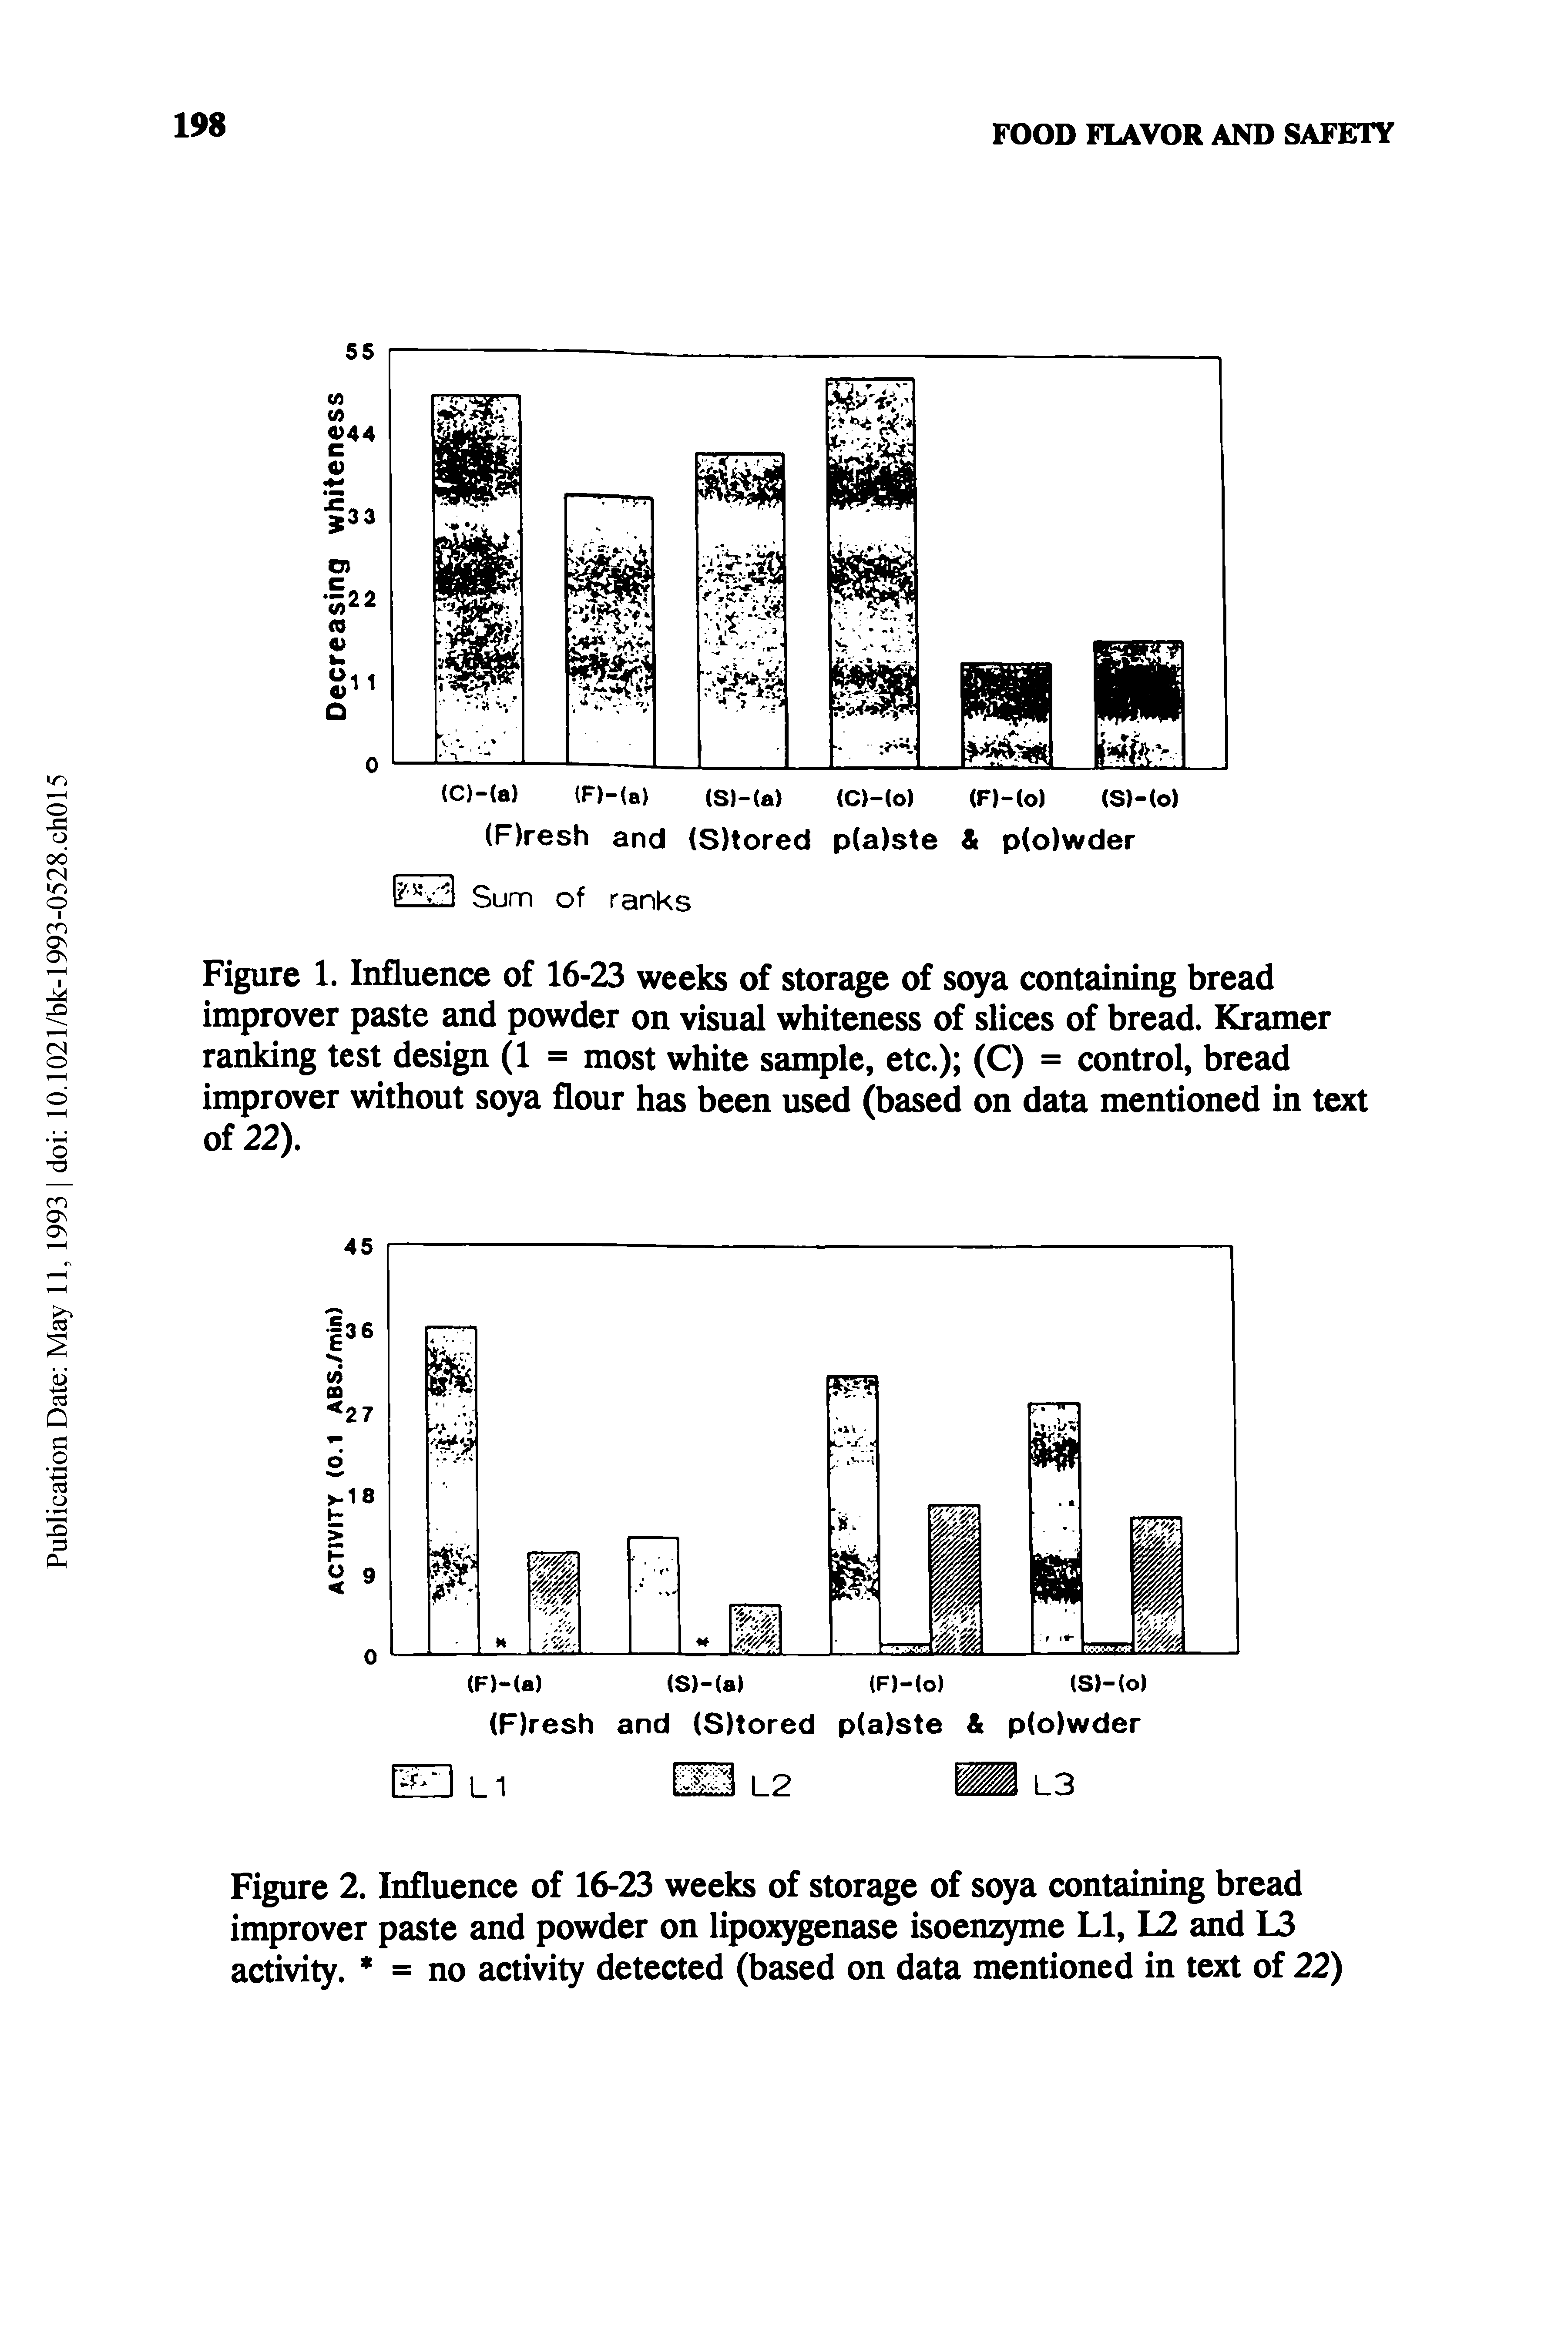 Figure 1. Influence of 16-23 weeks of storage of soya containing bread improver paste and powder on visual whiteness of slices of bread. Kramer ranking test design (1 = most white sample, etc.) (C) = control, bread improver without soya flour has been used (based on data mentioned in text of 22).